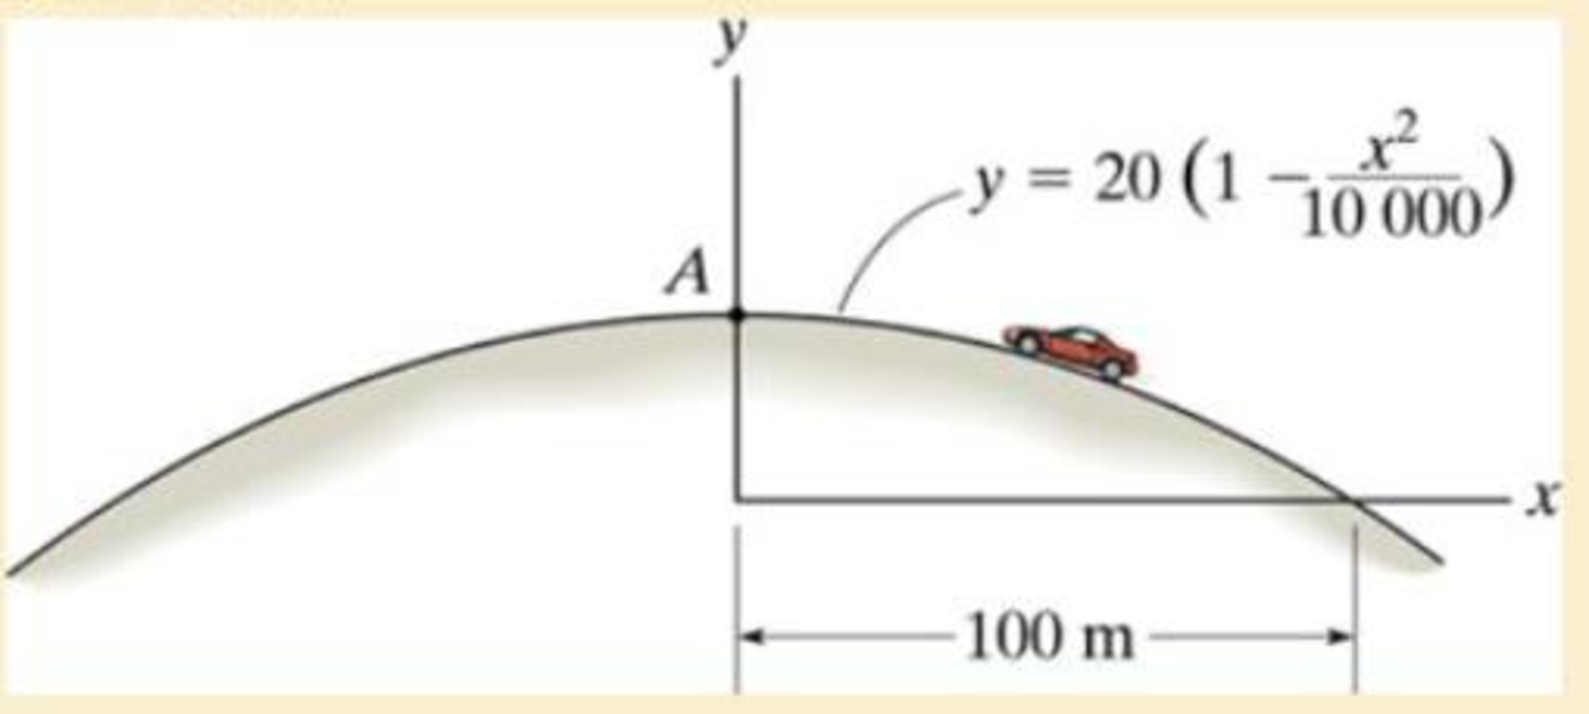 Chapter 13.5, Problem 74P, Determine the maximum constant speed at which the 2-Mg car can travel over the crest of the hill at 